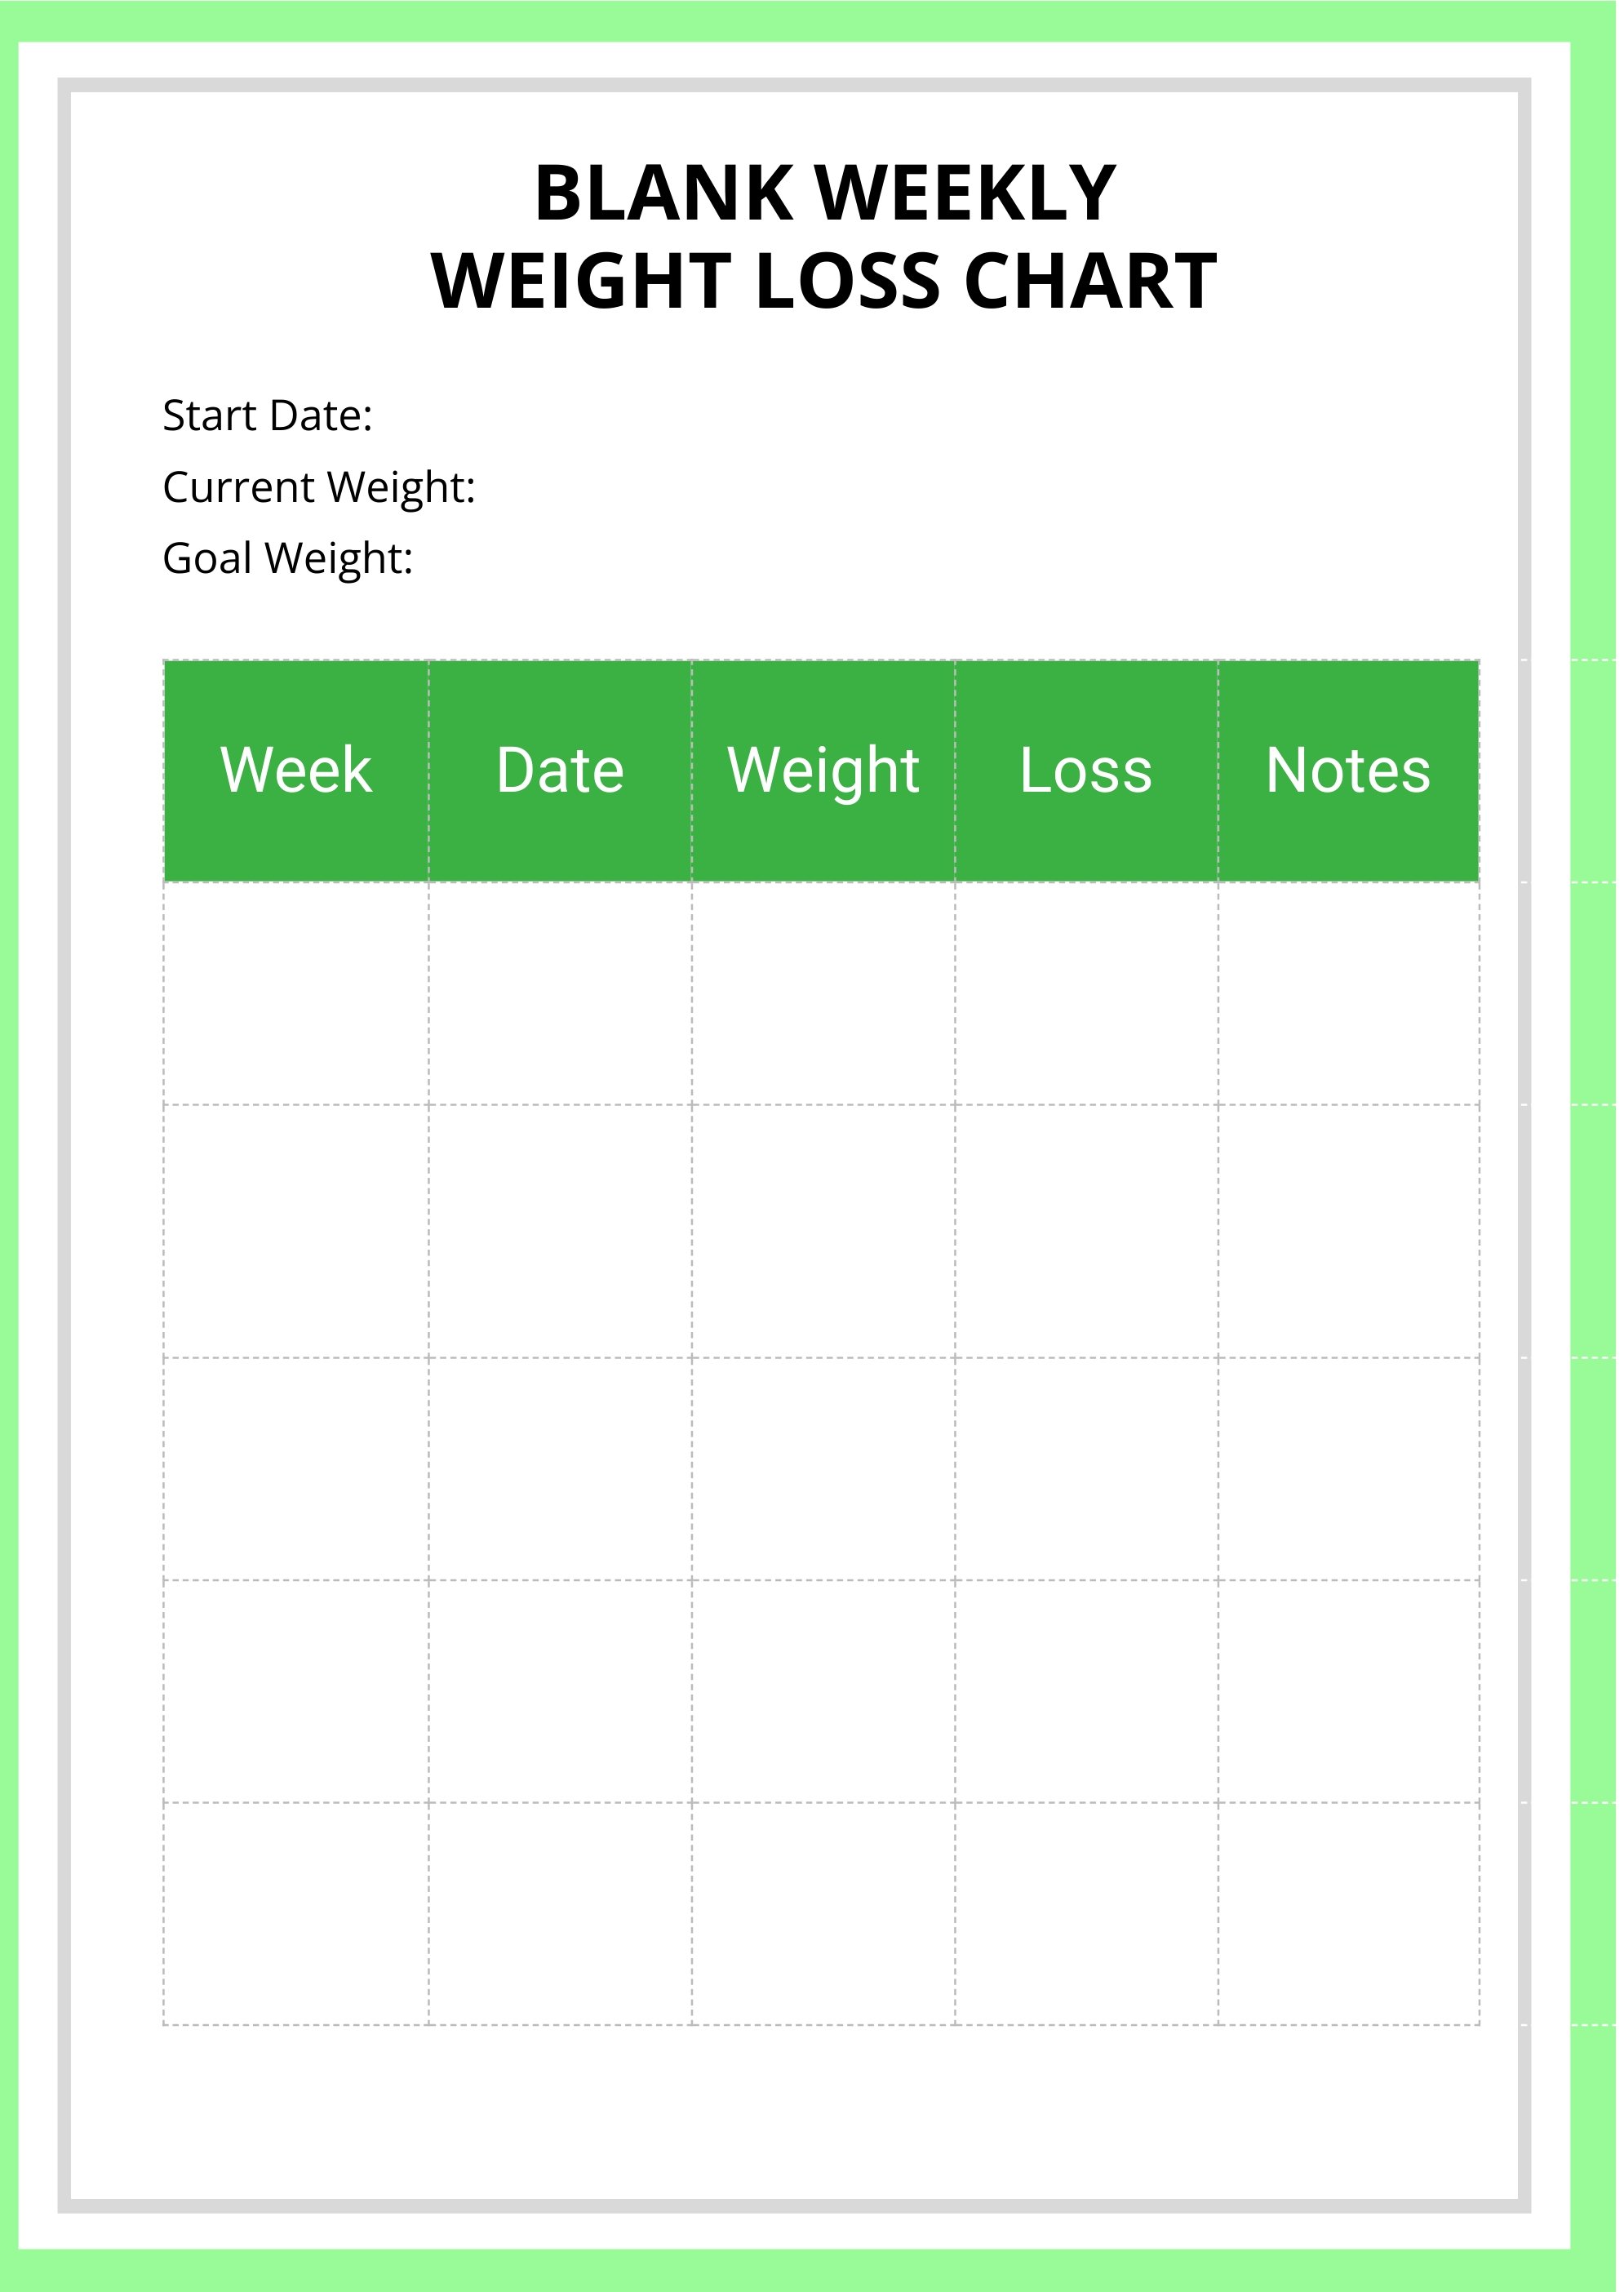 Blank Weekly Weight Loss Chart